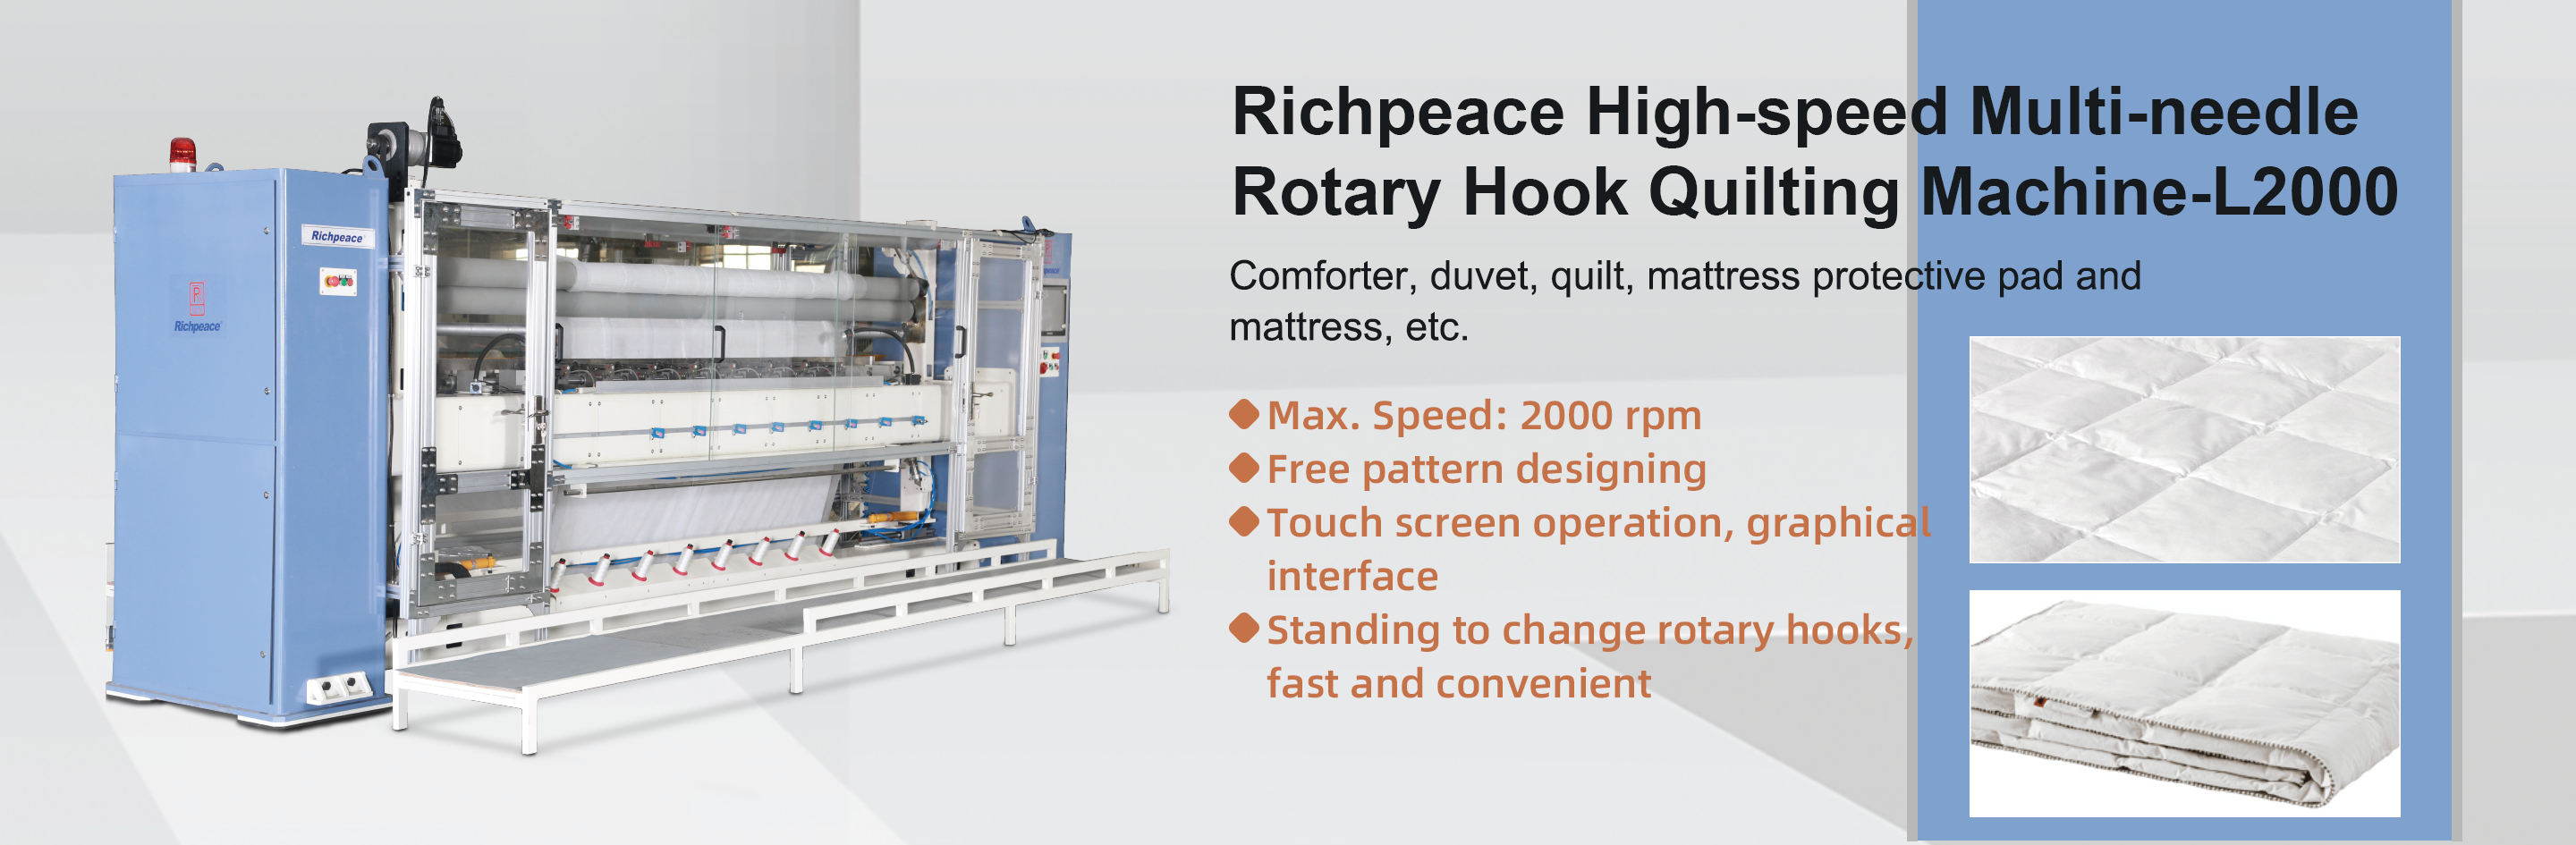 L2000 Multi-needle Rotary Hook Quilting Machine